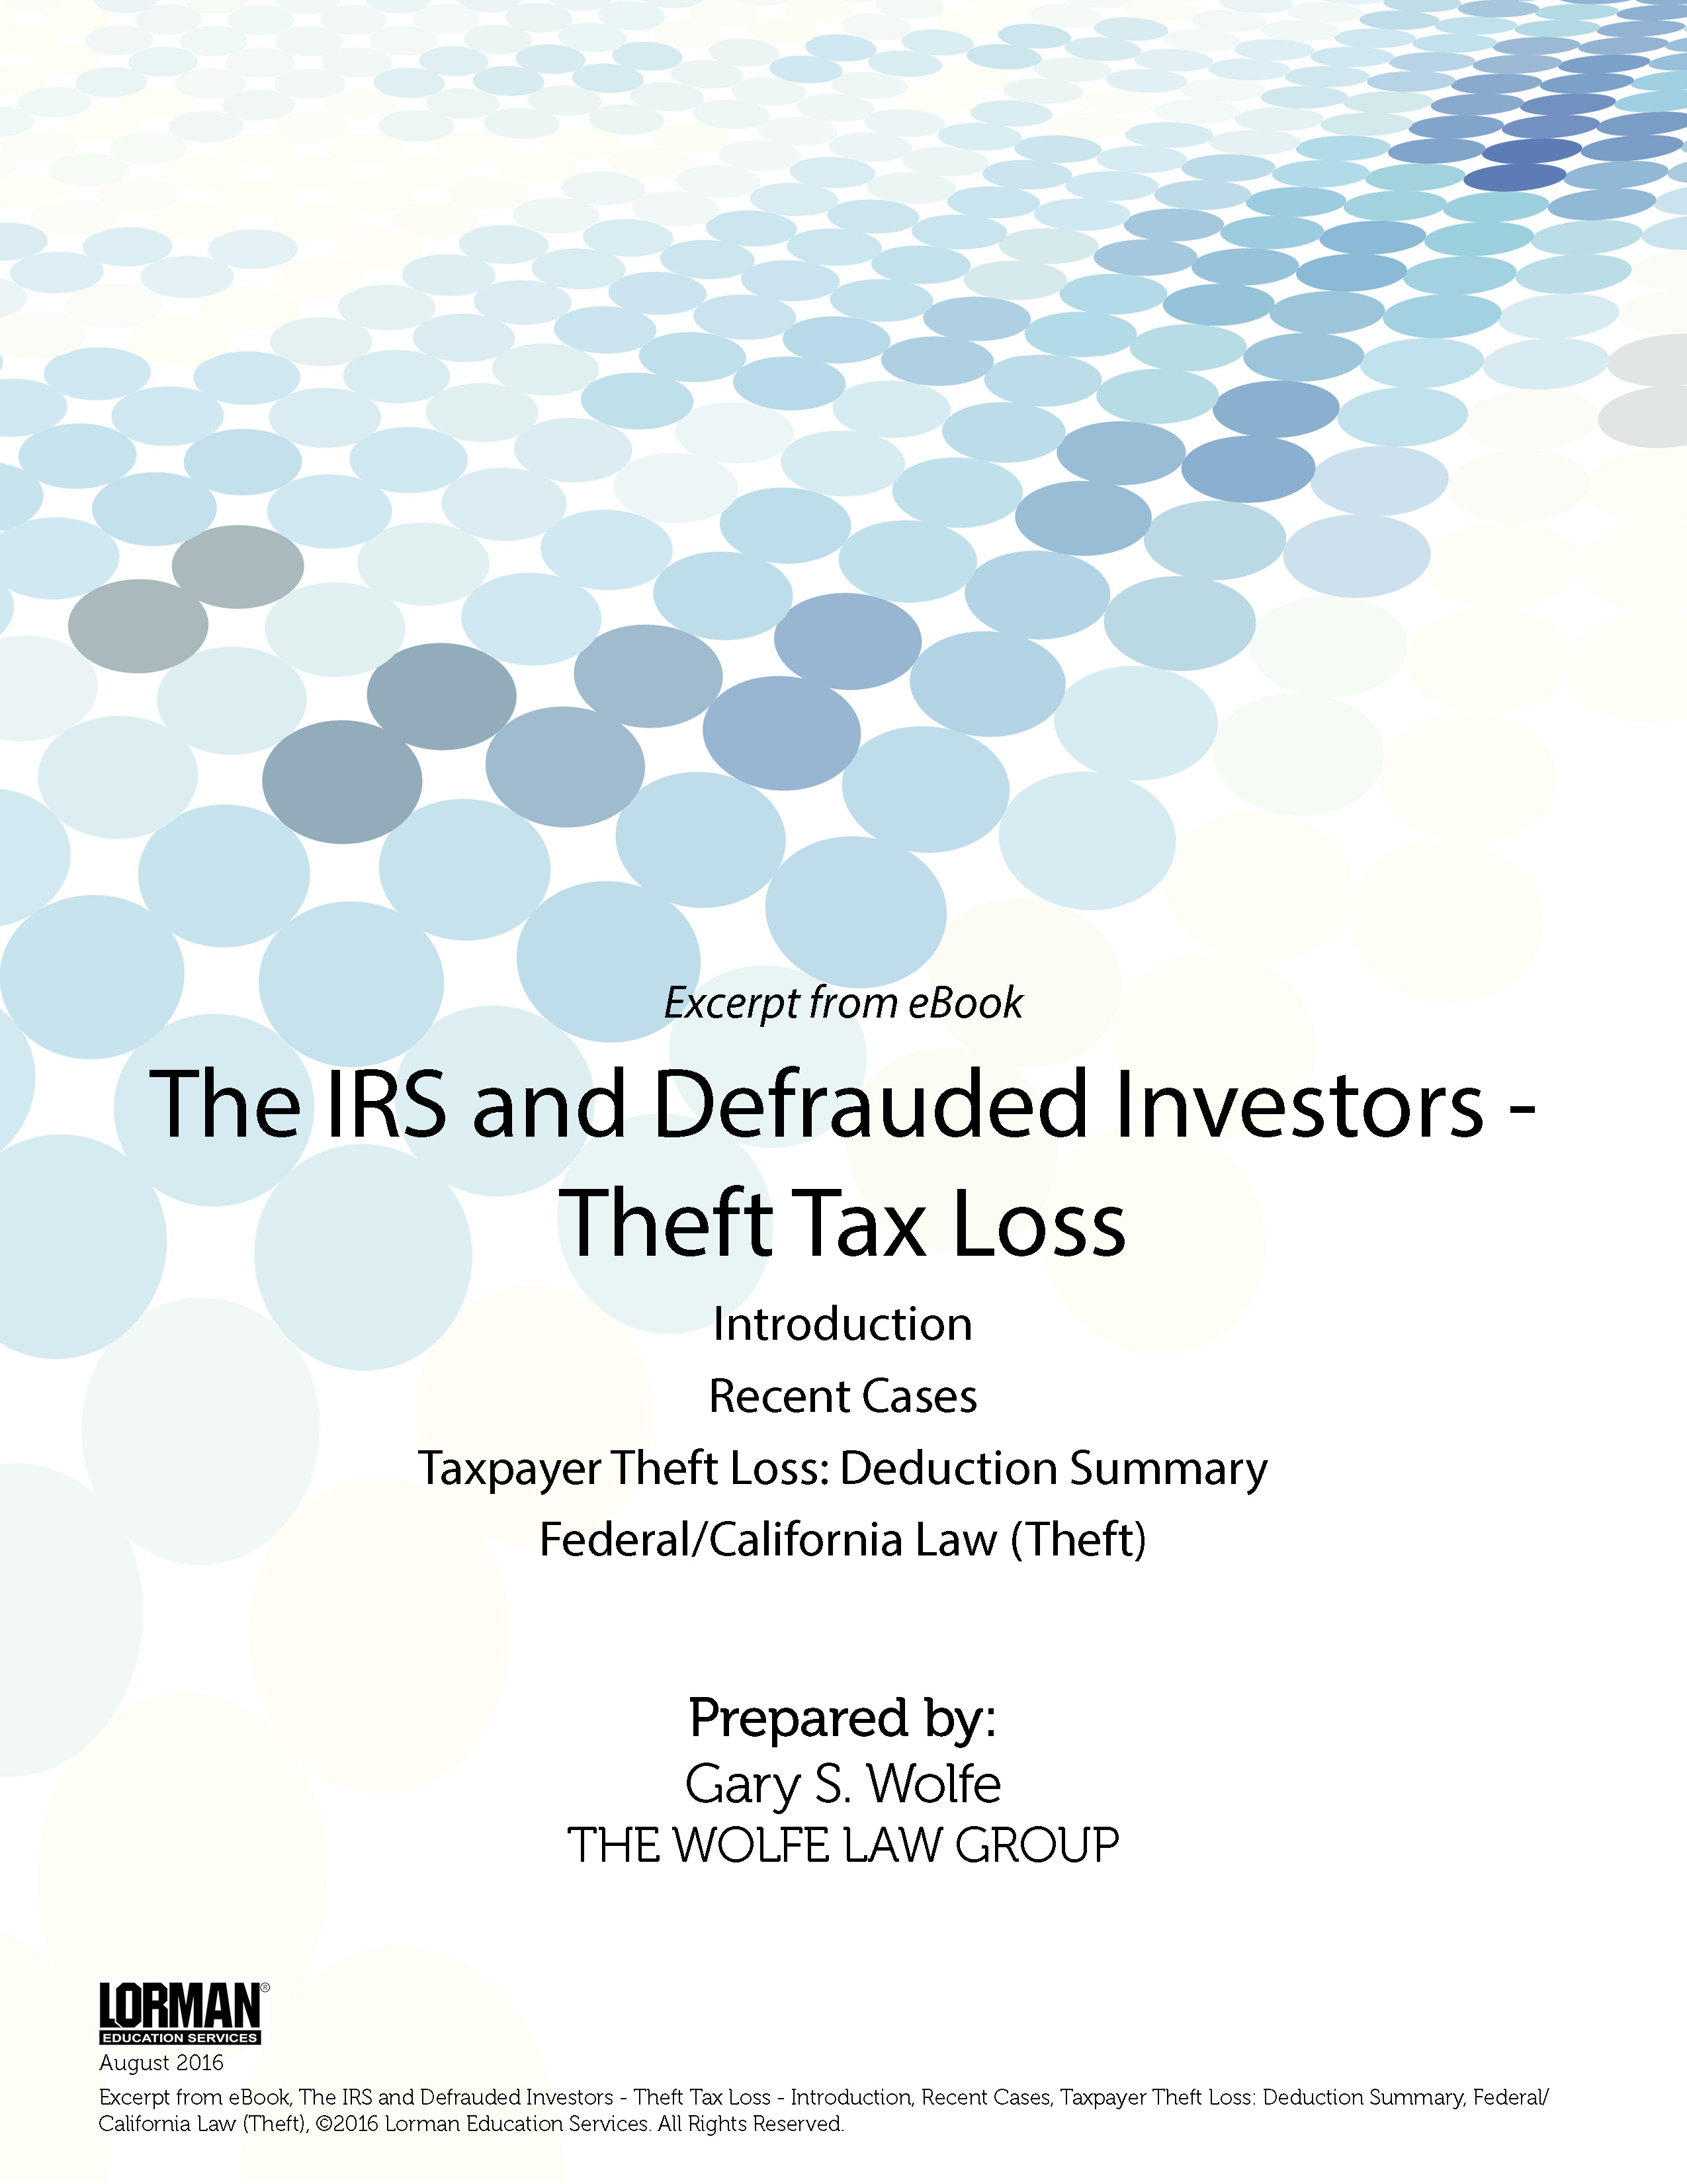 The IRS and Defrauded Investors